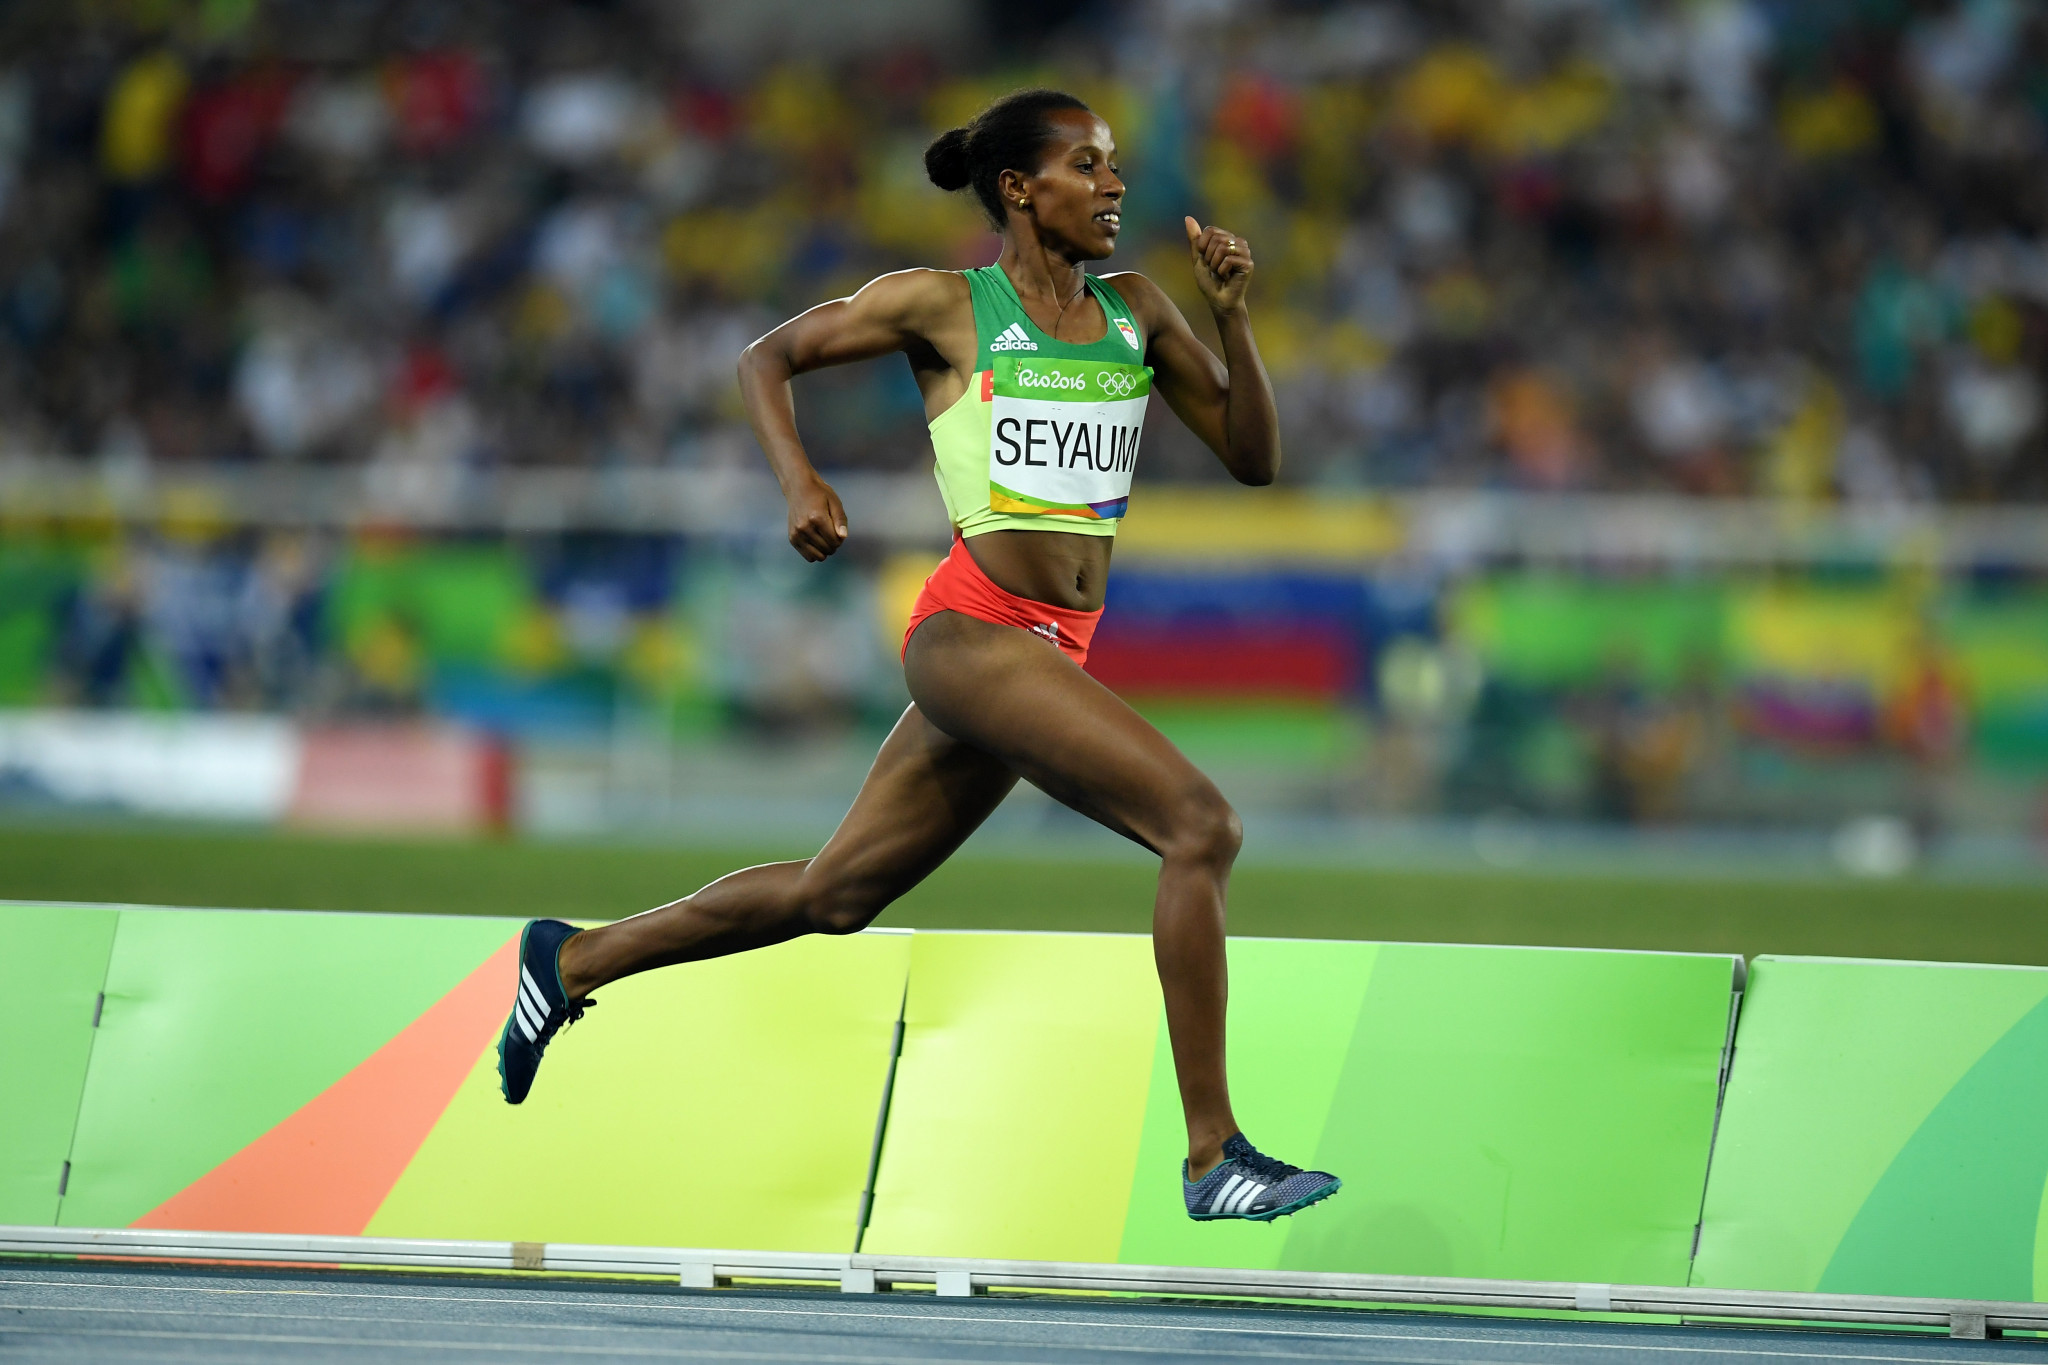 Dawit Seyaum claimed victory in the women's Campaccio race ©Getty Images